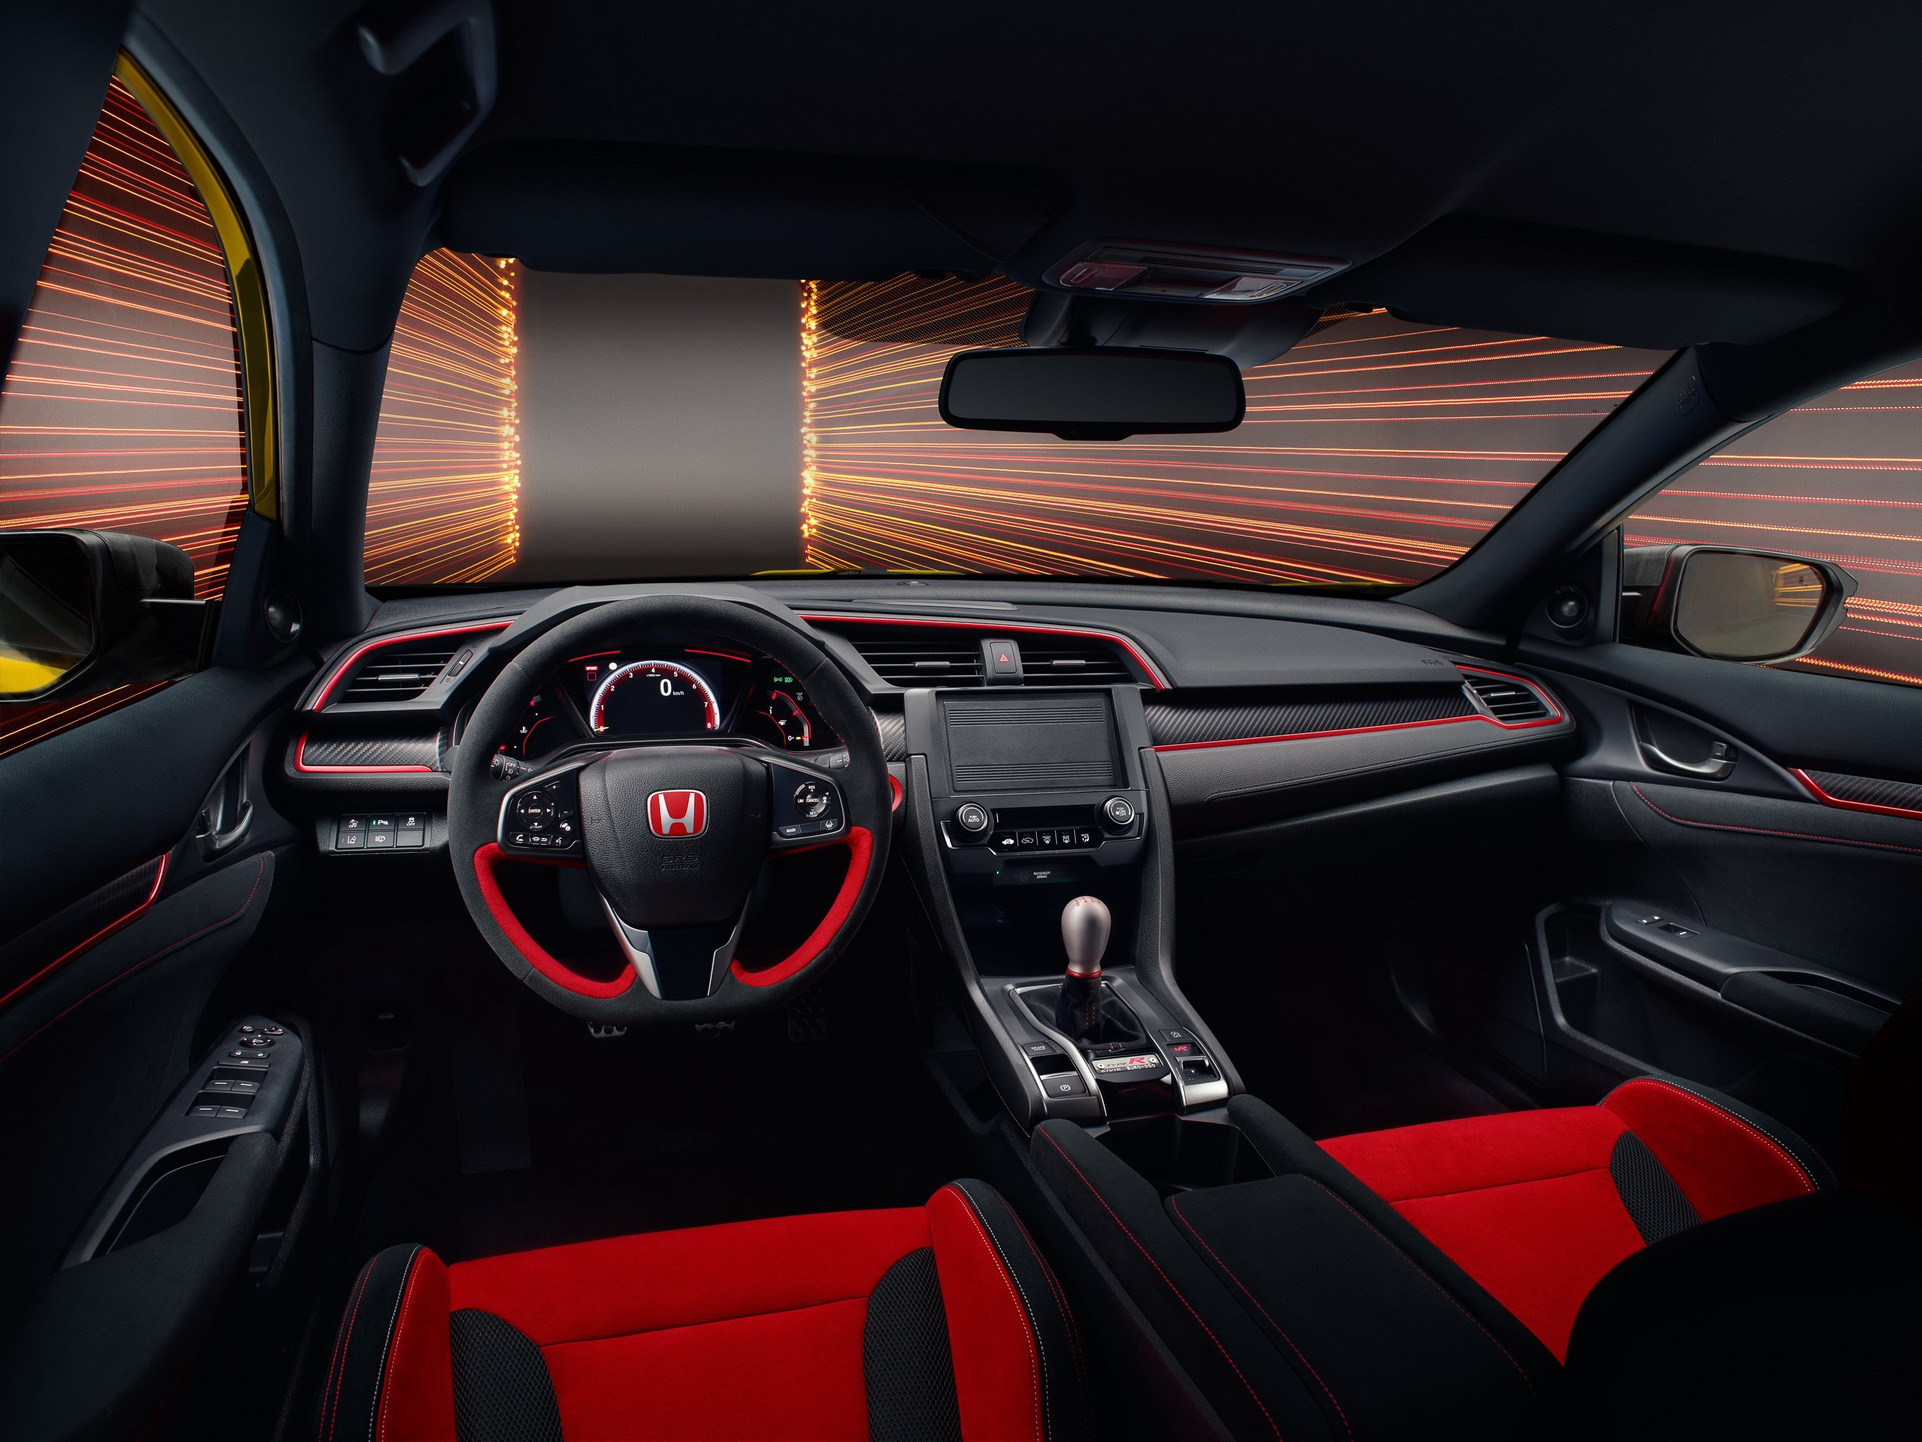 Lighter 2021 Honda Civic Type R Limited Edition Promises To Be